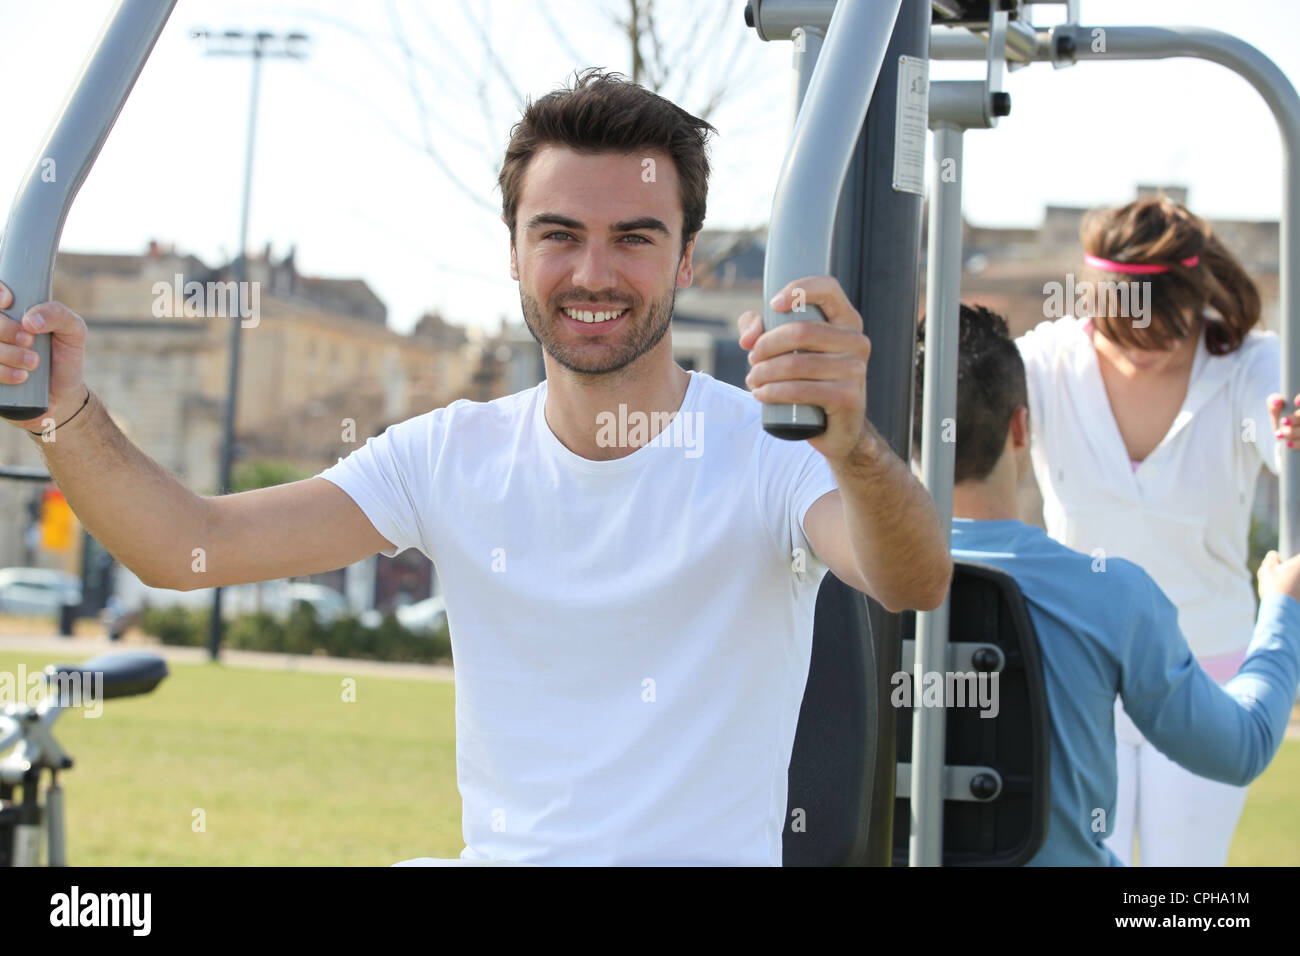 a man doing fitness with public fitness machine Stock Photo